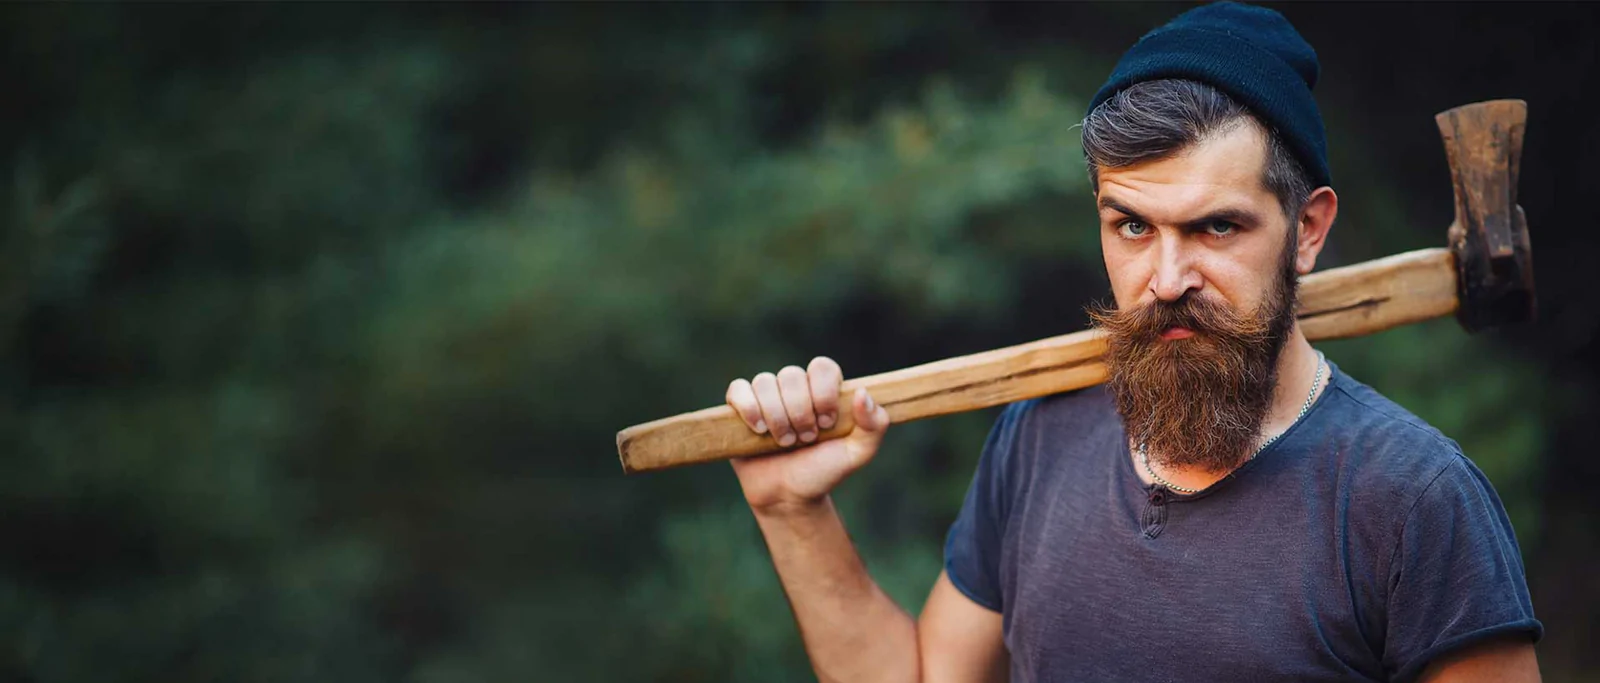 4 Definitive Beard Styles You Could Go for to Get an Amazing Look